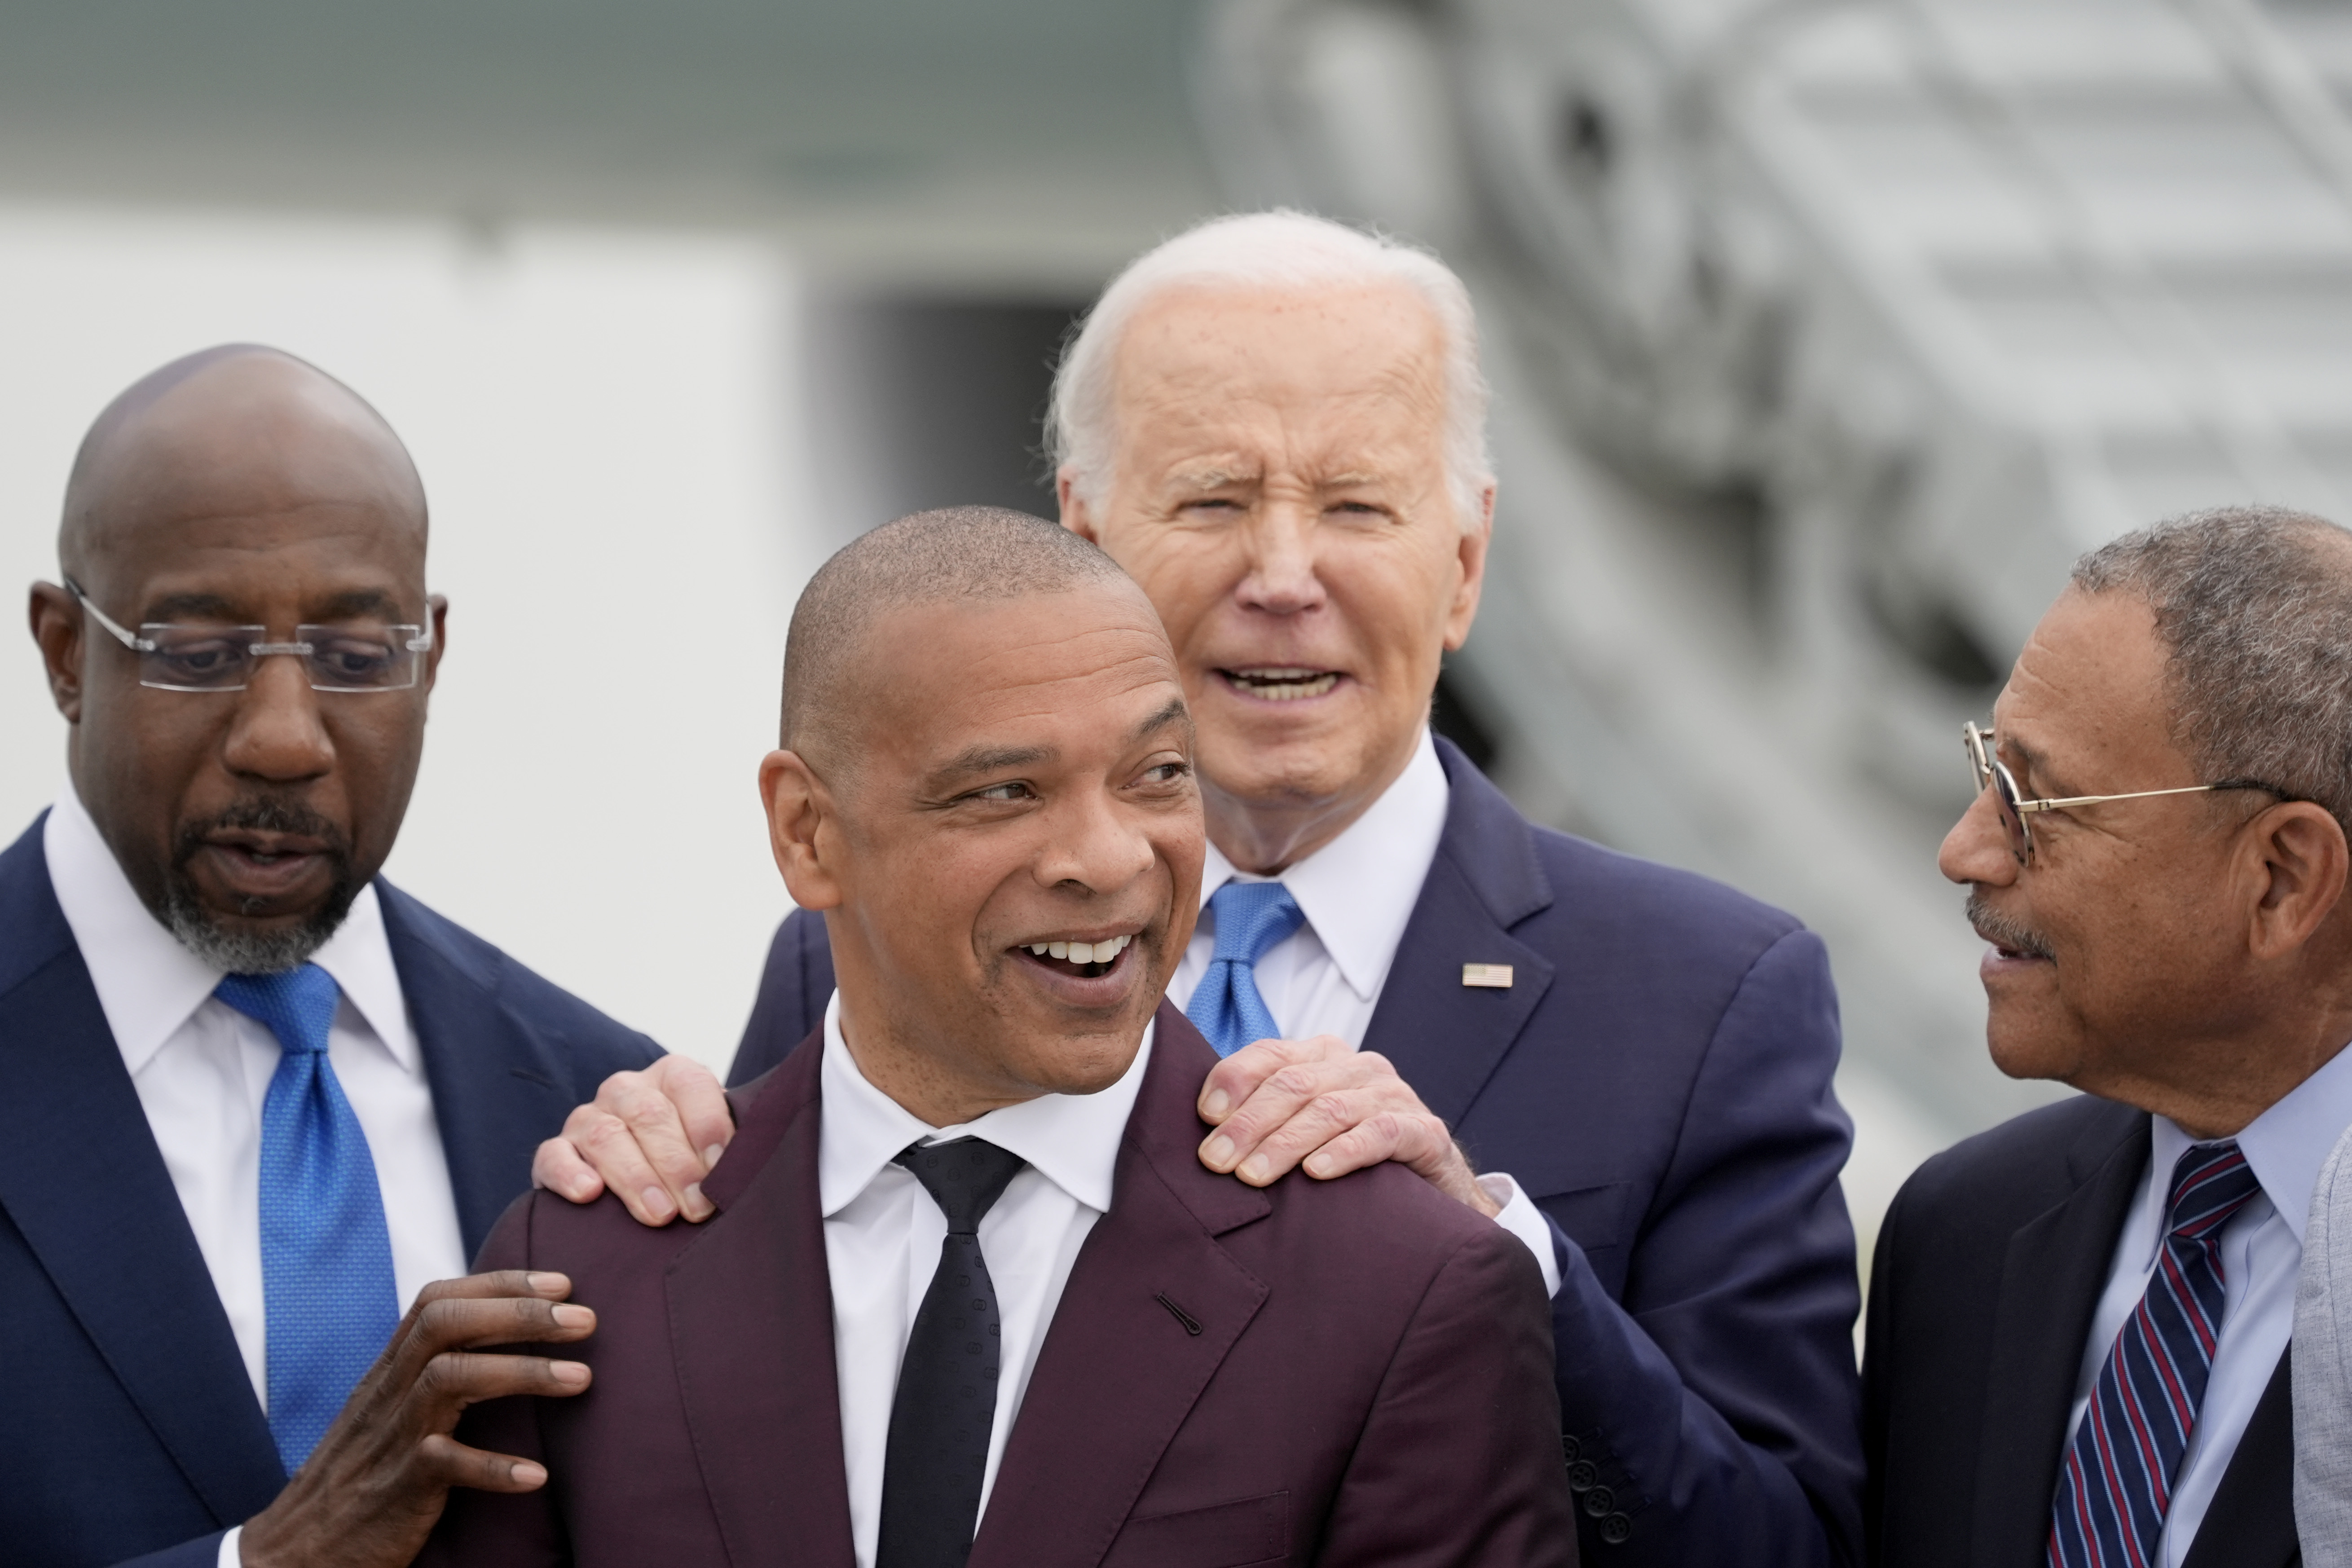 President Joe Biden, second from right, is greeted by alumni of Morehouse College including Sen. Raphael Warnock, D-Ga., from left, Marlon Kimpson, a member of the advisory committee for trade policy and negotiations in the office of the U.S. Trade Representative, and Rep. Sanford Bishop, D-Ga., upon arriving at Hartsfield-Jackson Atlanta International Airport, Saturday, May 18, 2024, in Atlanta. (AP Photo/Alex Brandon)